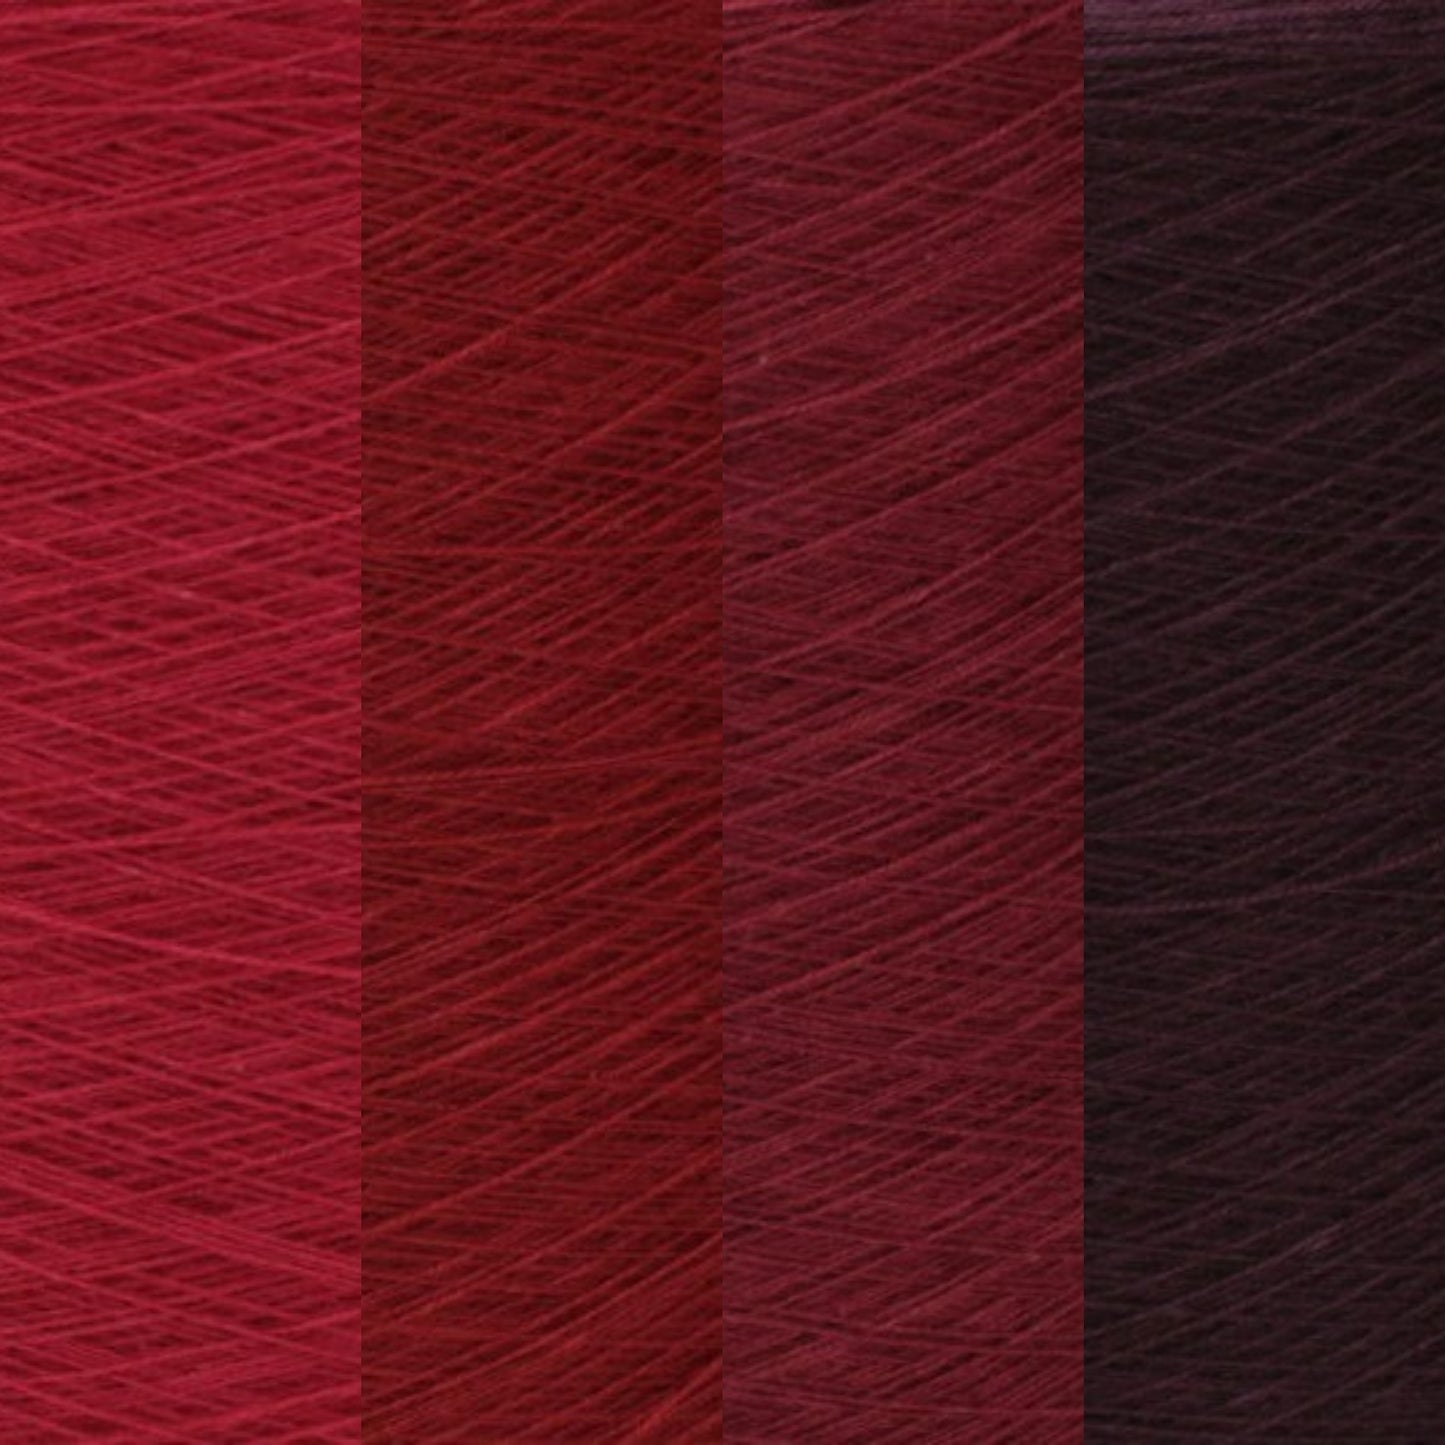 C323 cotton/acrylic ombre yarn cake, normal style, 160g, about 800m, 3ply